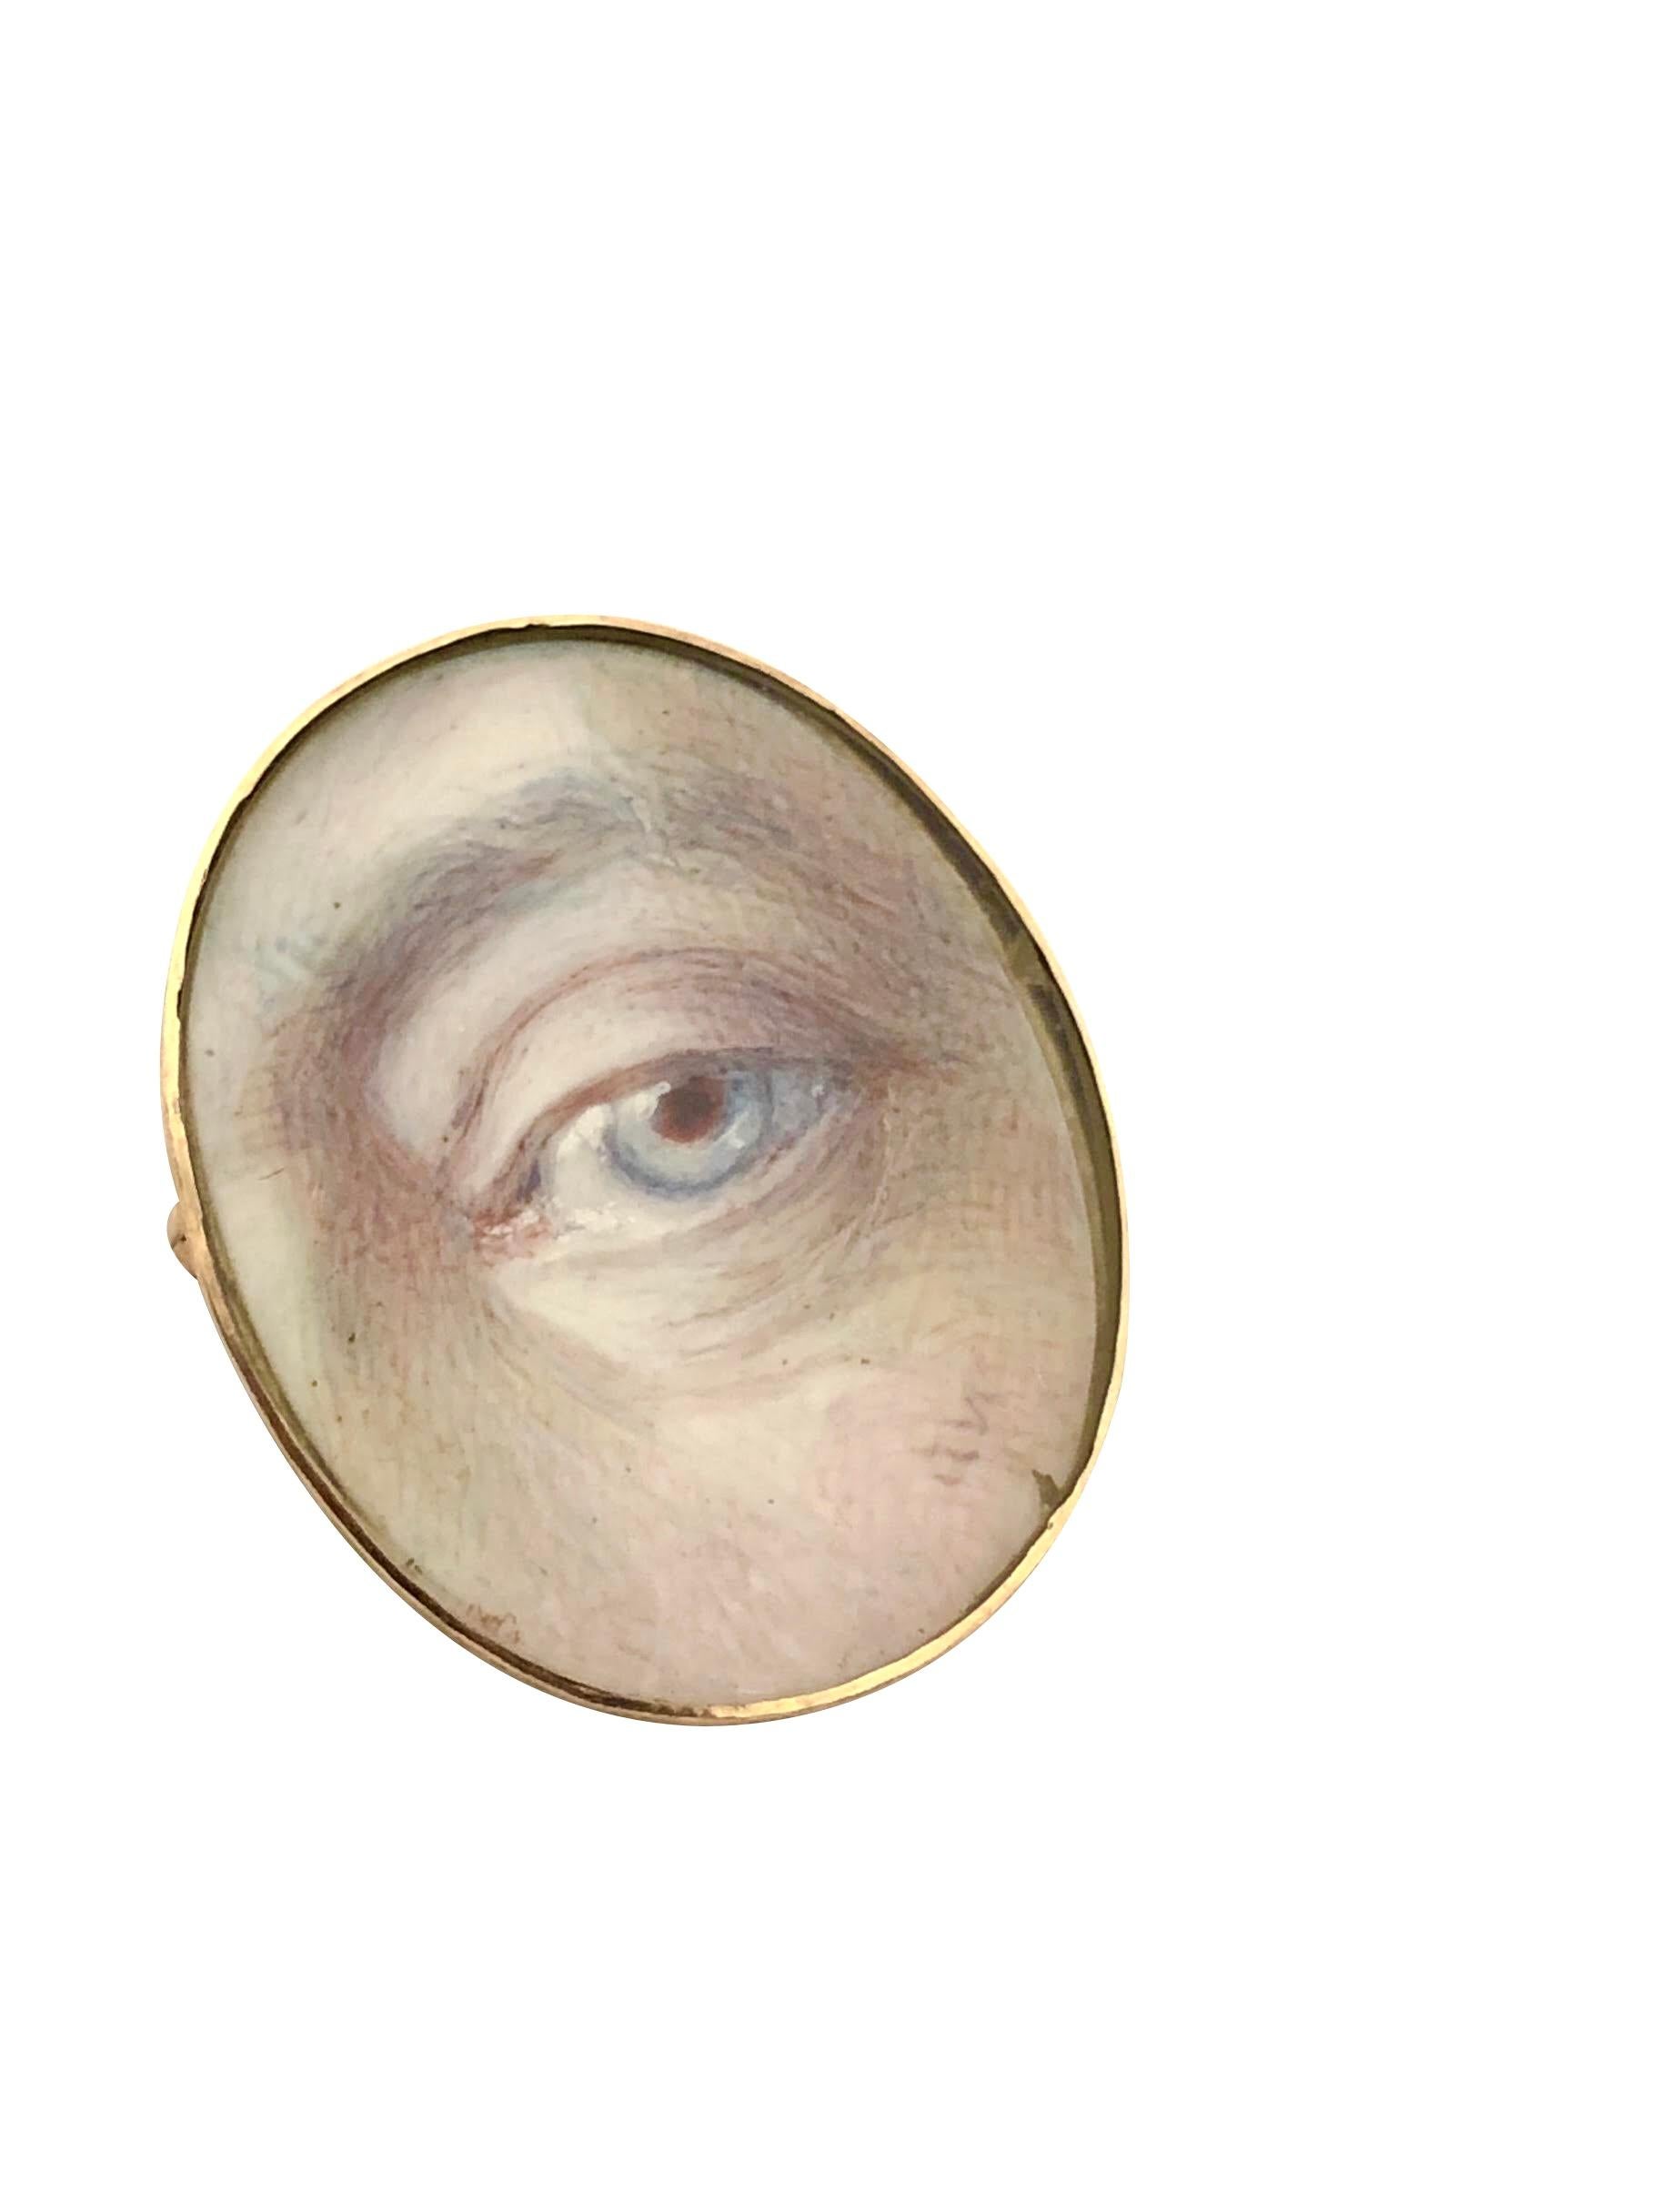 Circa 1880 - 1900 Lover's Eye Brooch Pendant, 12K Yellow Gold and Finely Painted Lover's Eye under glass featuring the Artists initials, this unusually larger piece measures 1 X 3/4 Inch, the perimeter of the frame has hand engraved design work,